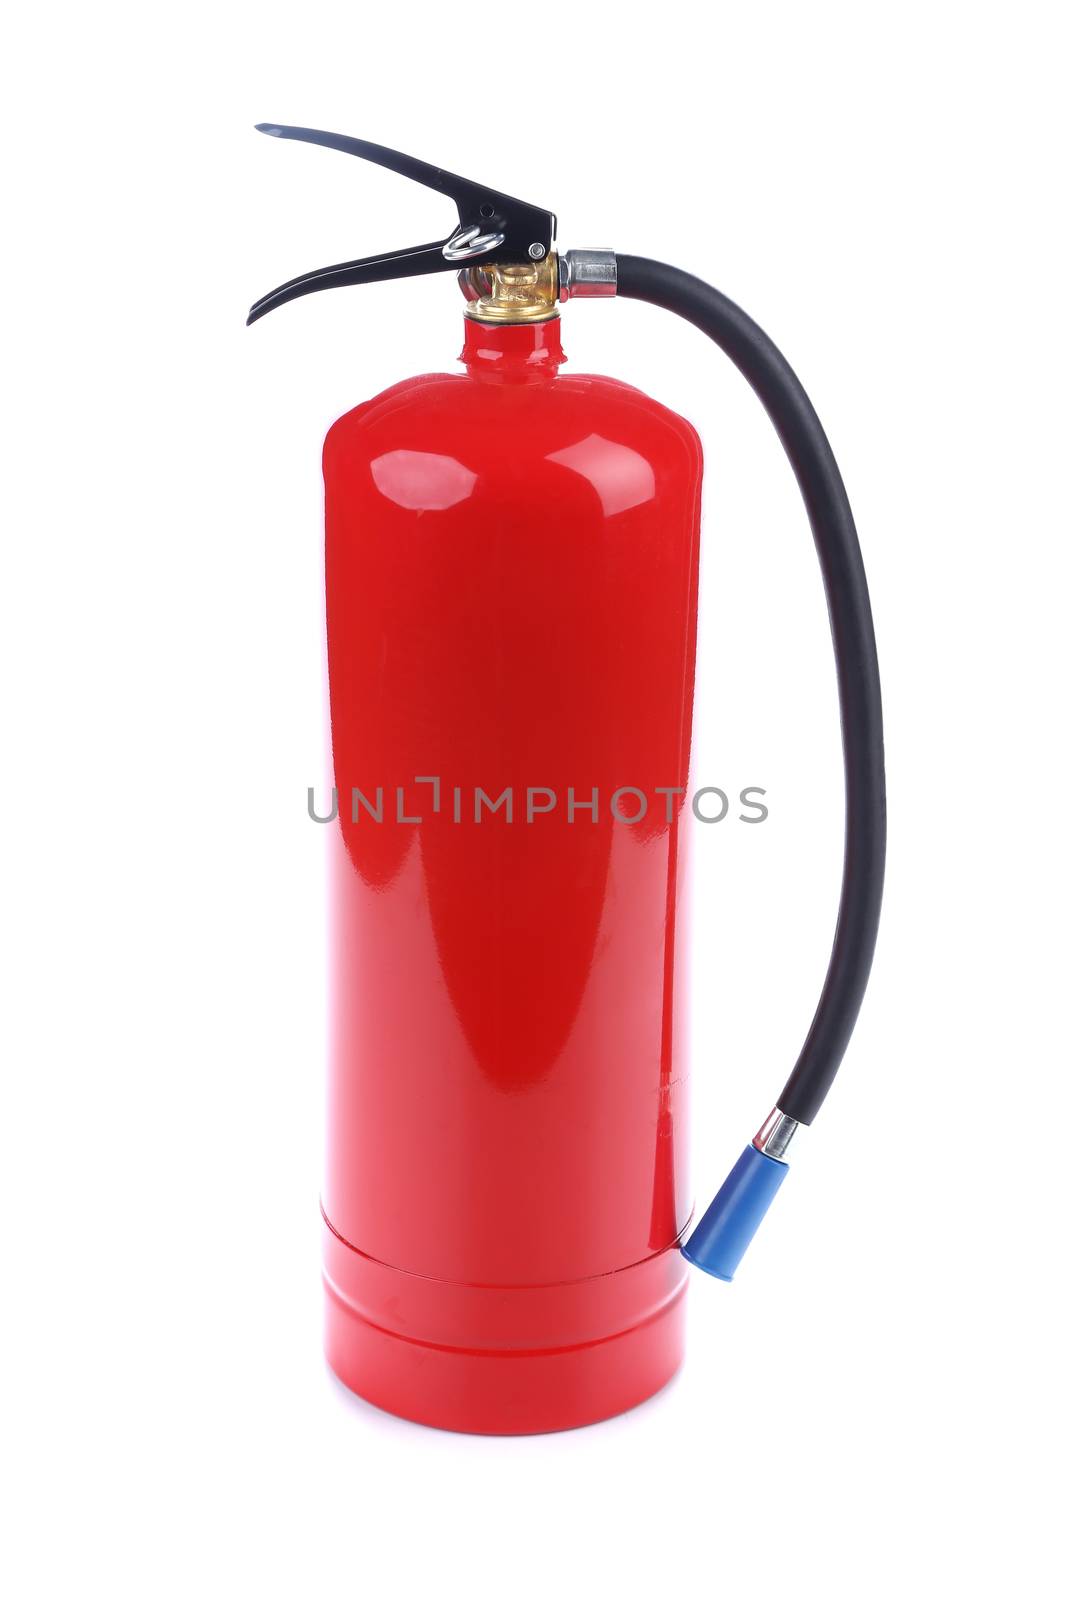 Chemical fire extinguisher isolated on white background